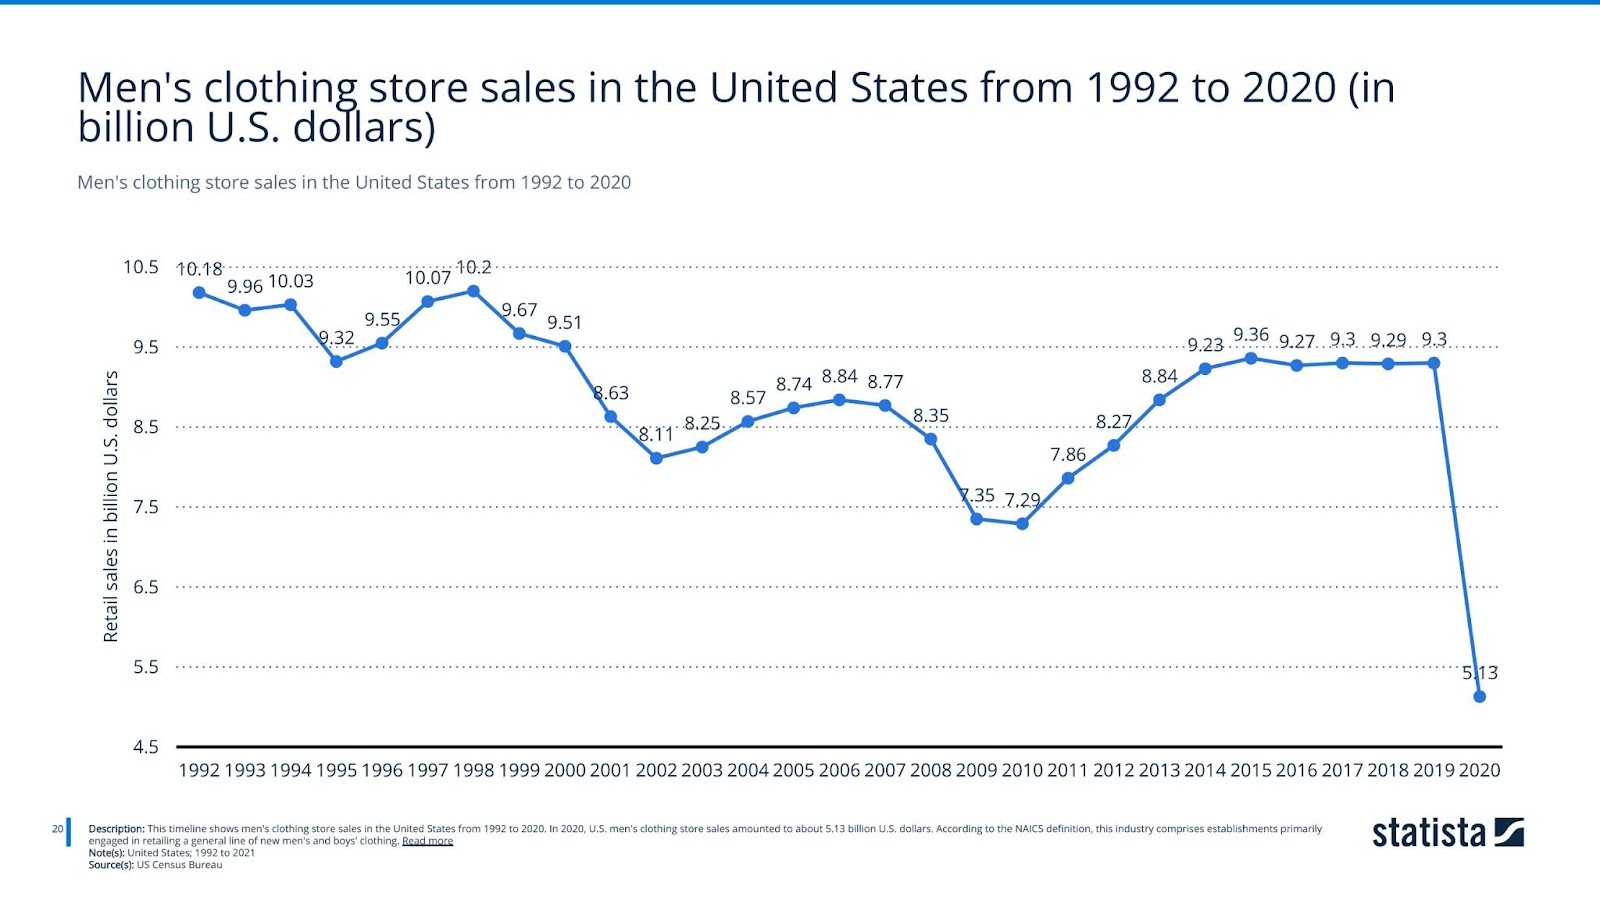 Men's clothing store sales in the United States from 1992 to 2020